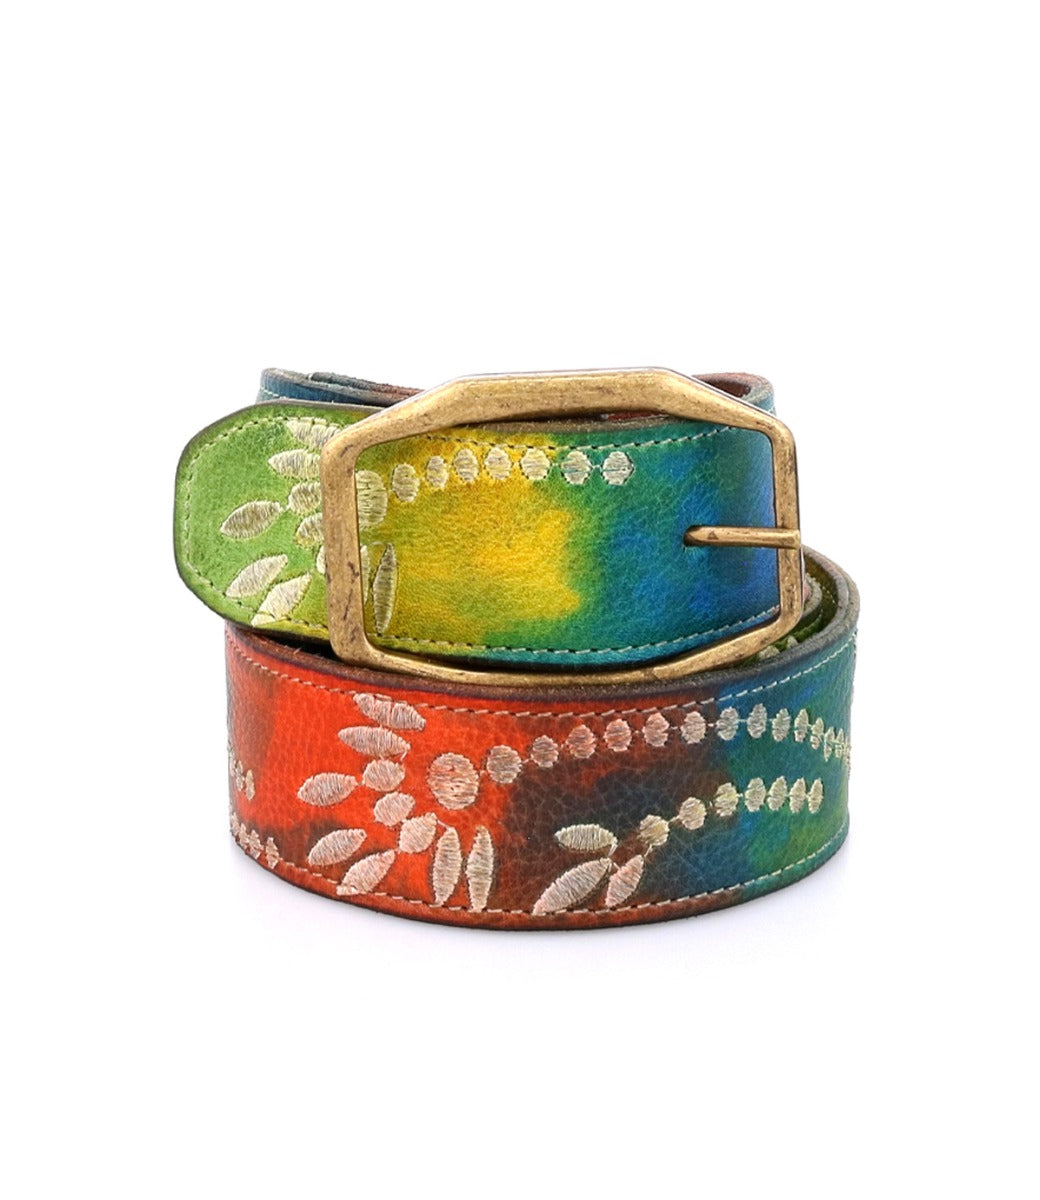 A colorful Mohawk belt with a gold buckle from Bed Stu.